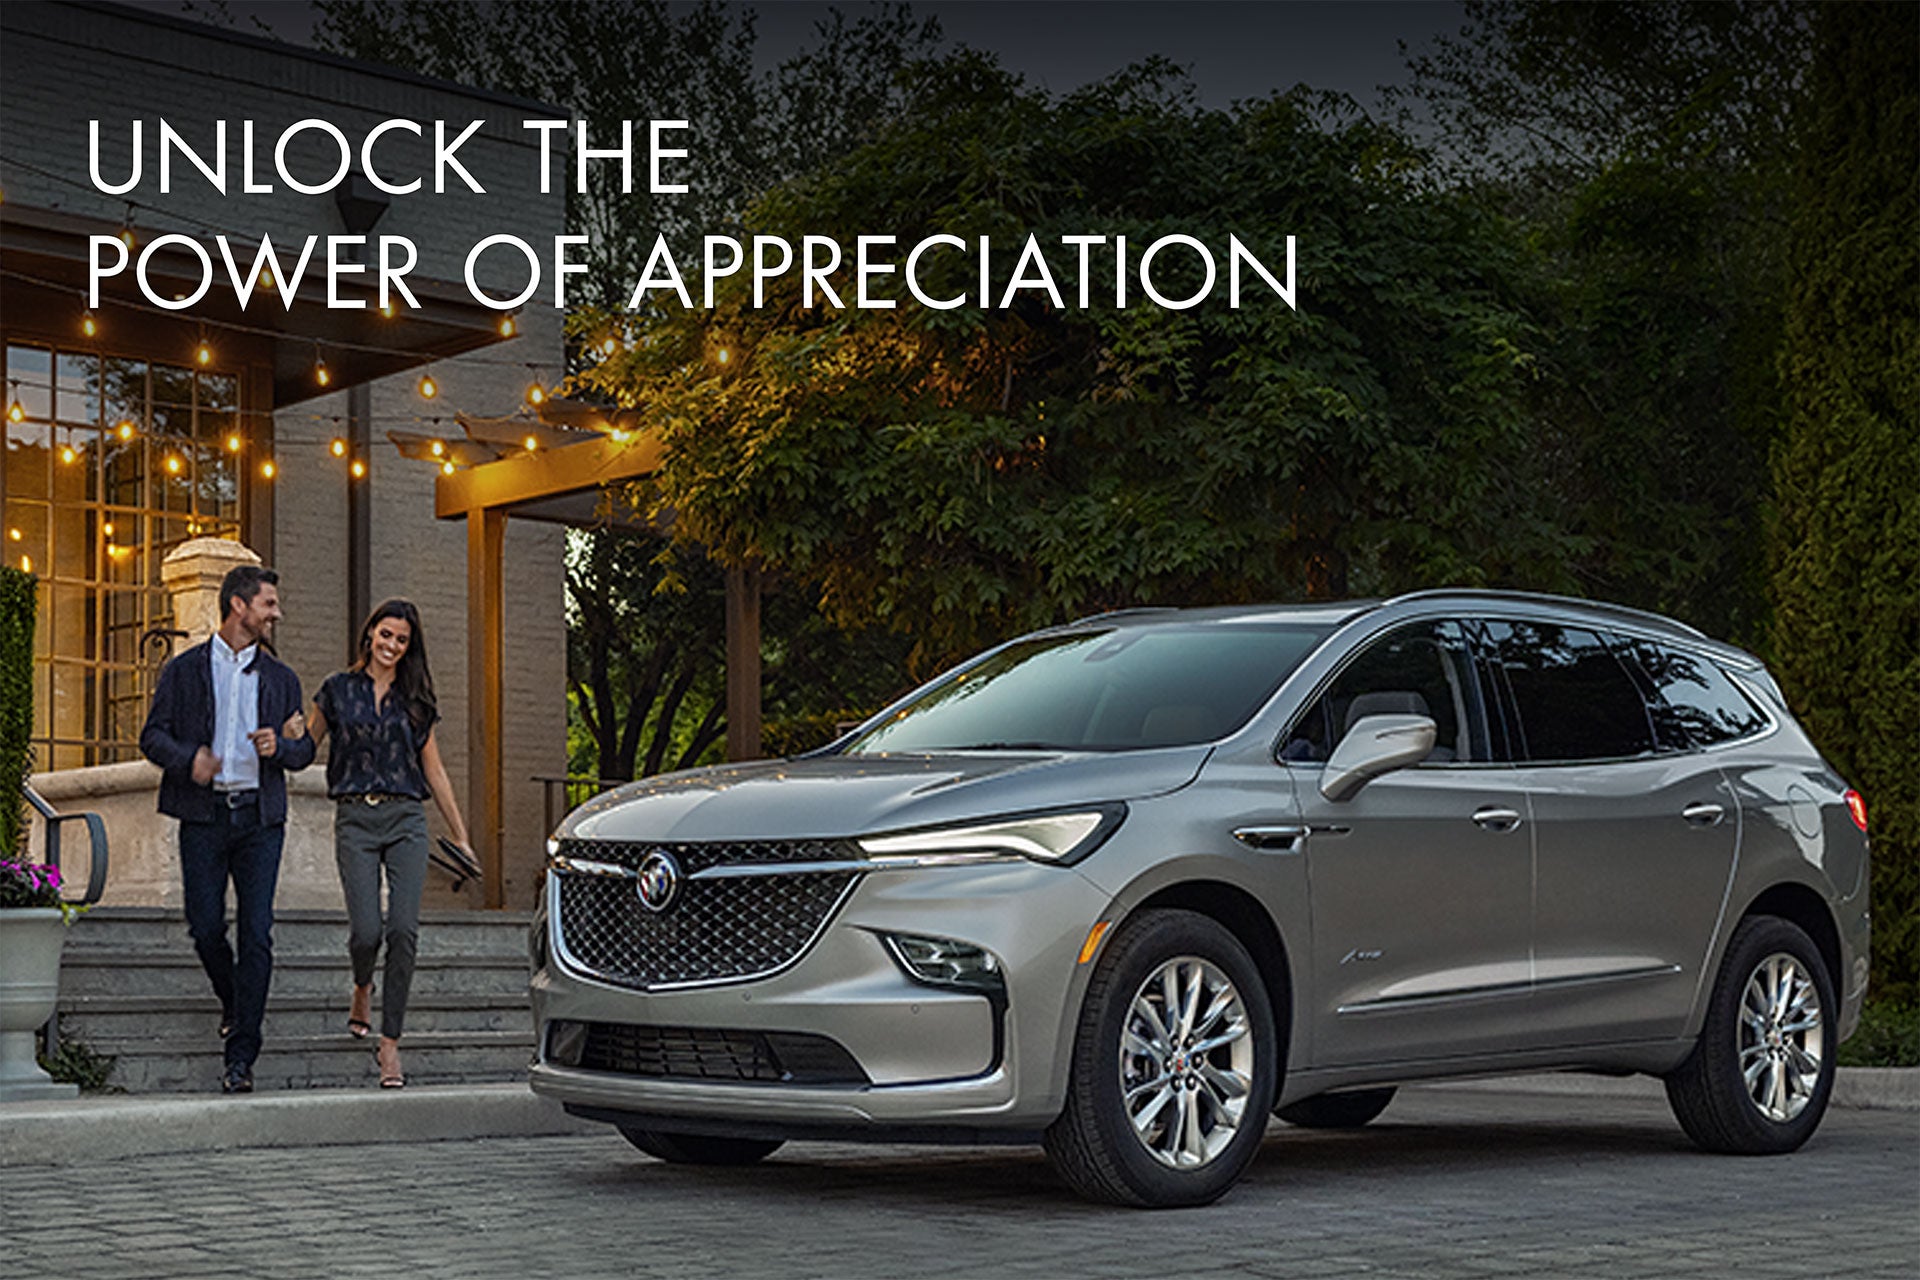 Unlock the power of appreciation | Mountain View Chevrolet in UPLAND CA